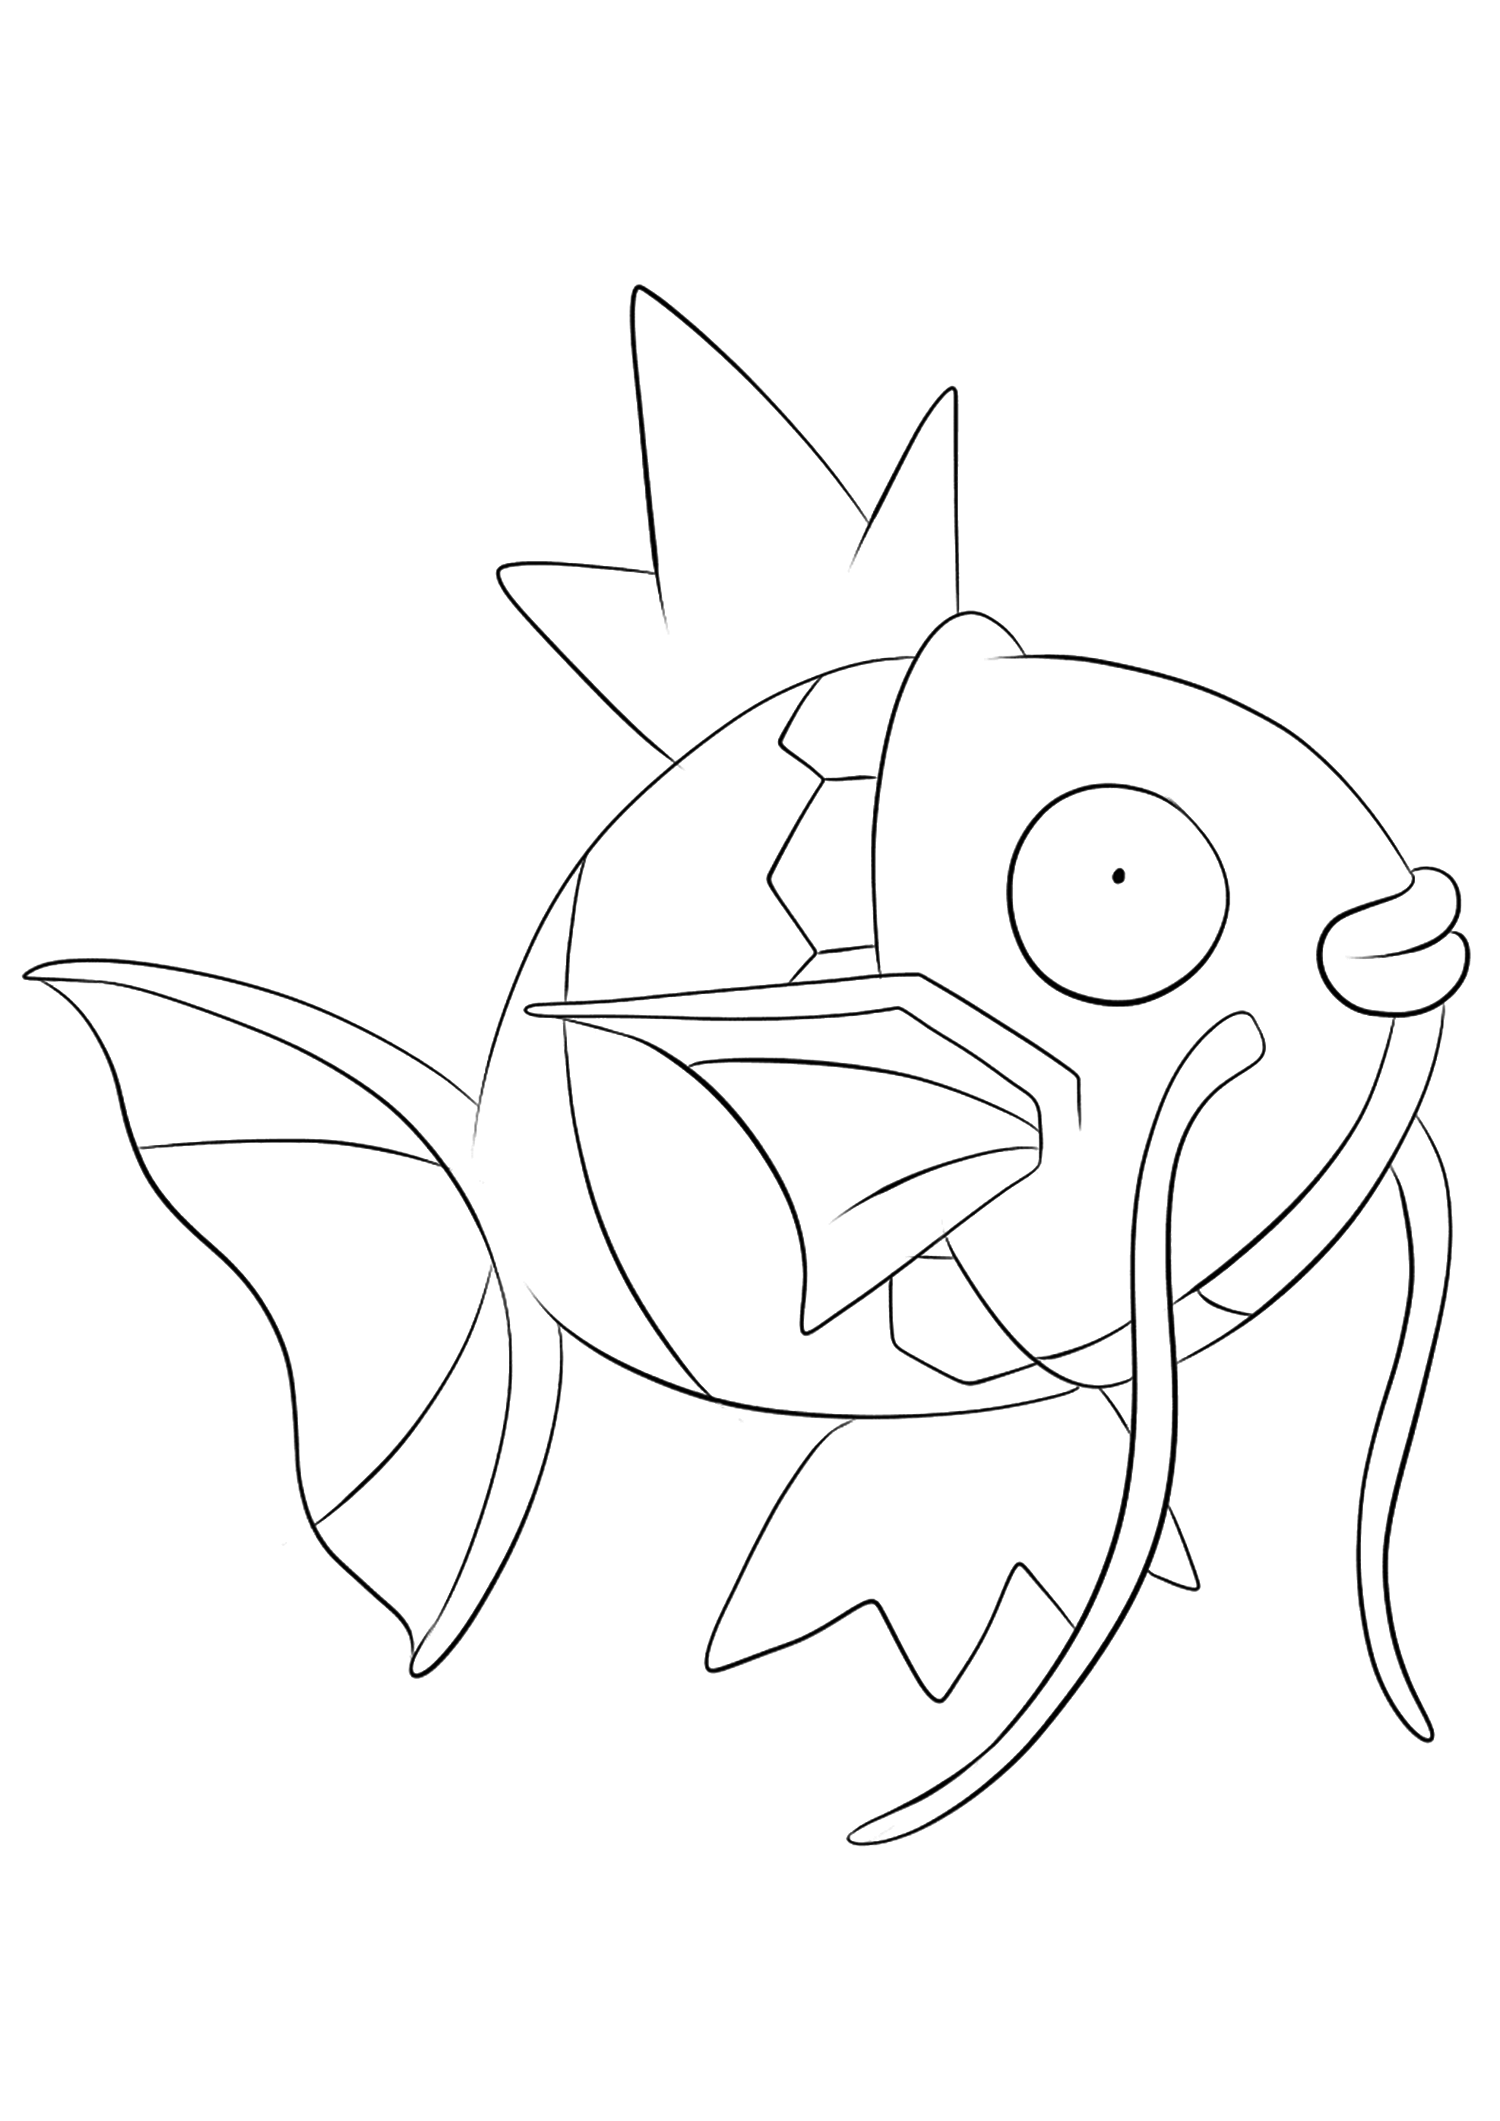 Magikarp (No.129). Magikarp Coloring page, Generation I Pokemon of type WaterOriginal image credit: Pokemon linearts by Lilly Gerbil on Deviantart.Permission:  All rights reserved © Pokemon company and Ken Sugimori.